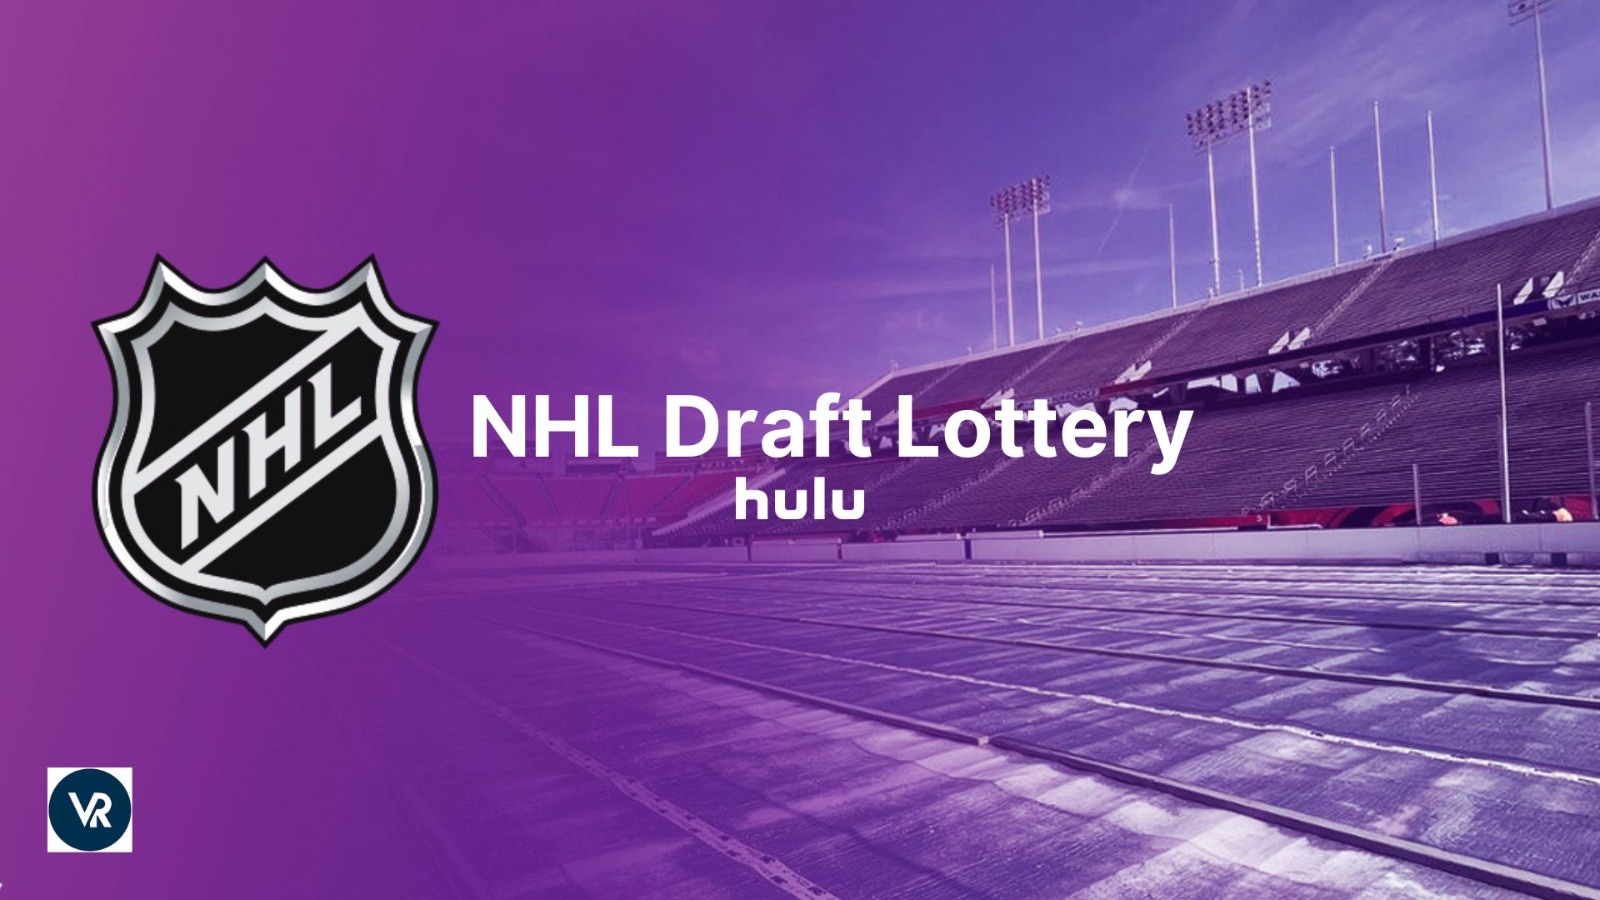 How to Watch NHL Draft Lottery 2023 Live in Canada on Hulu